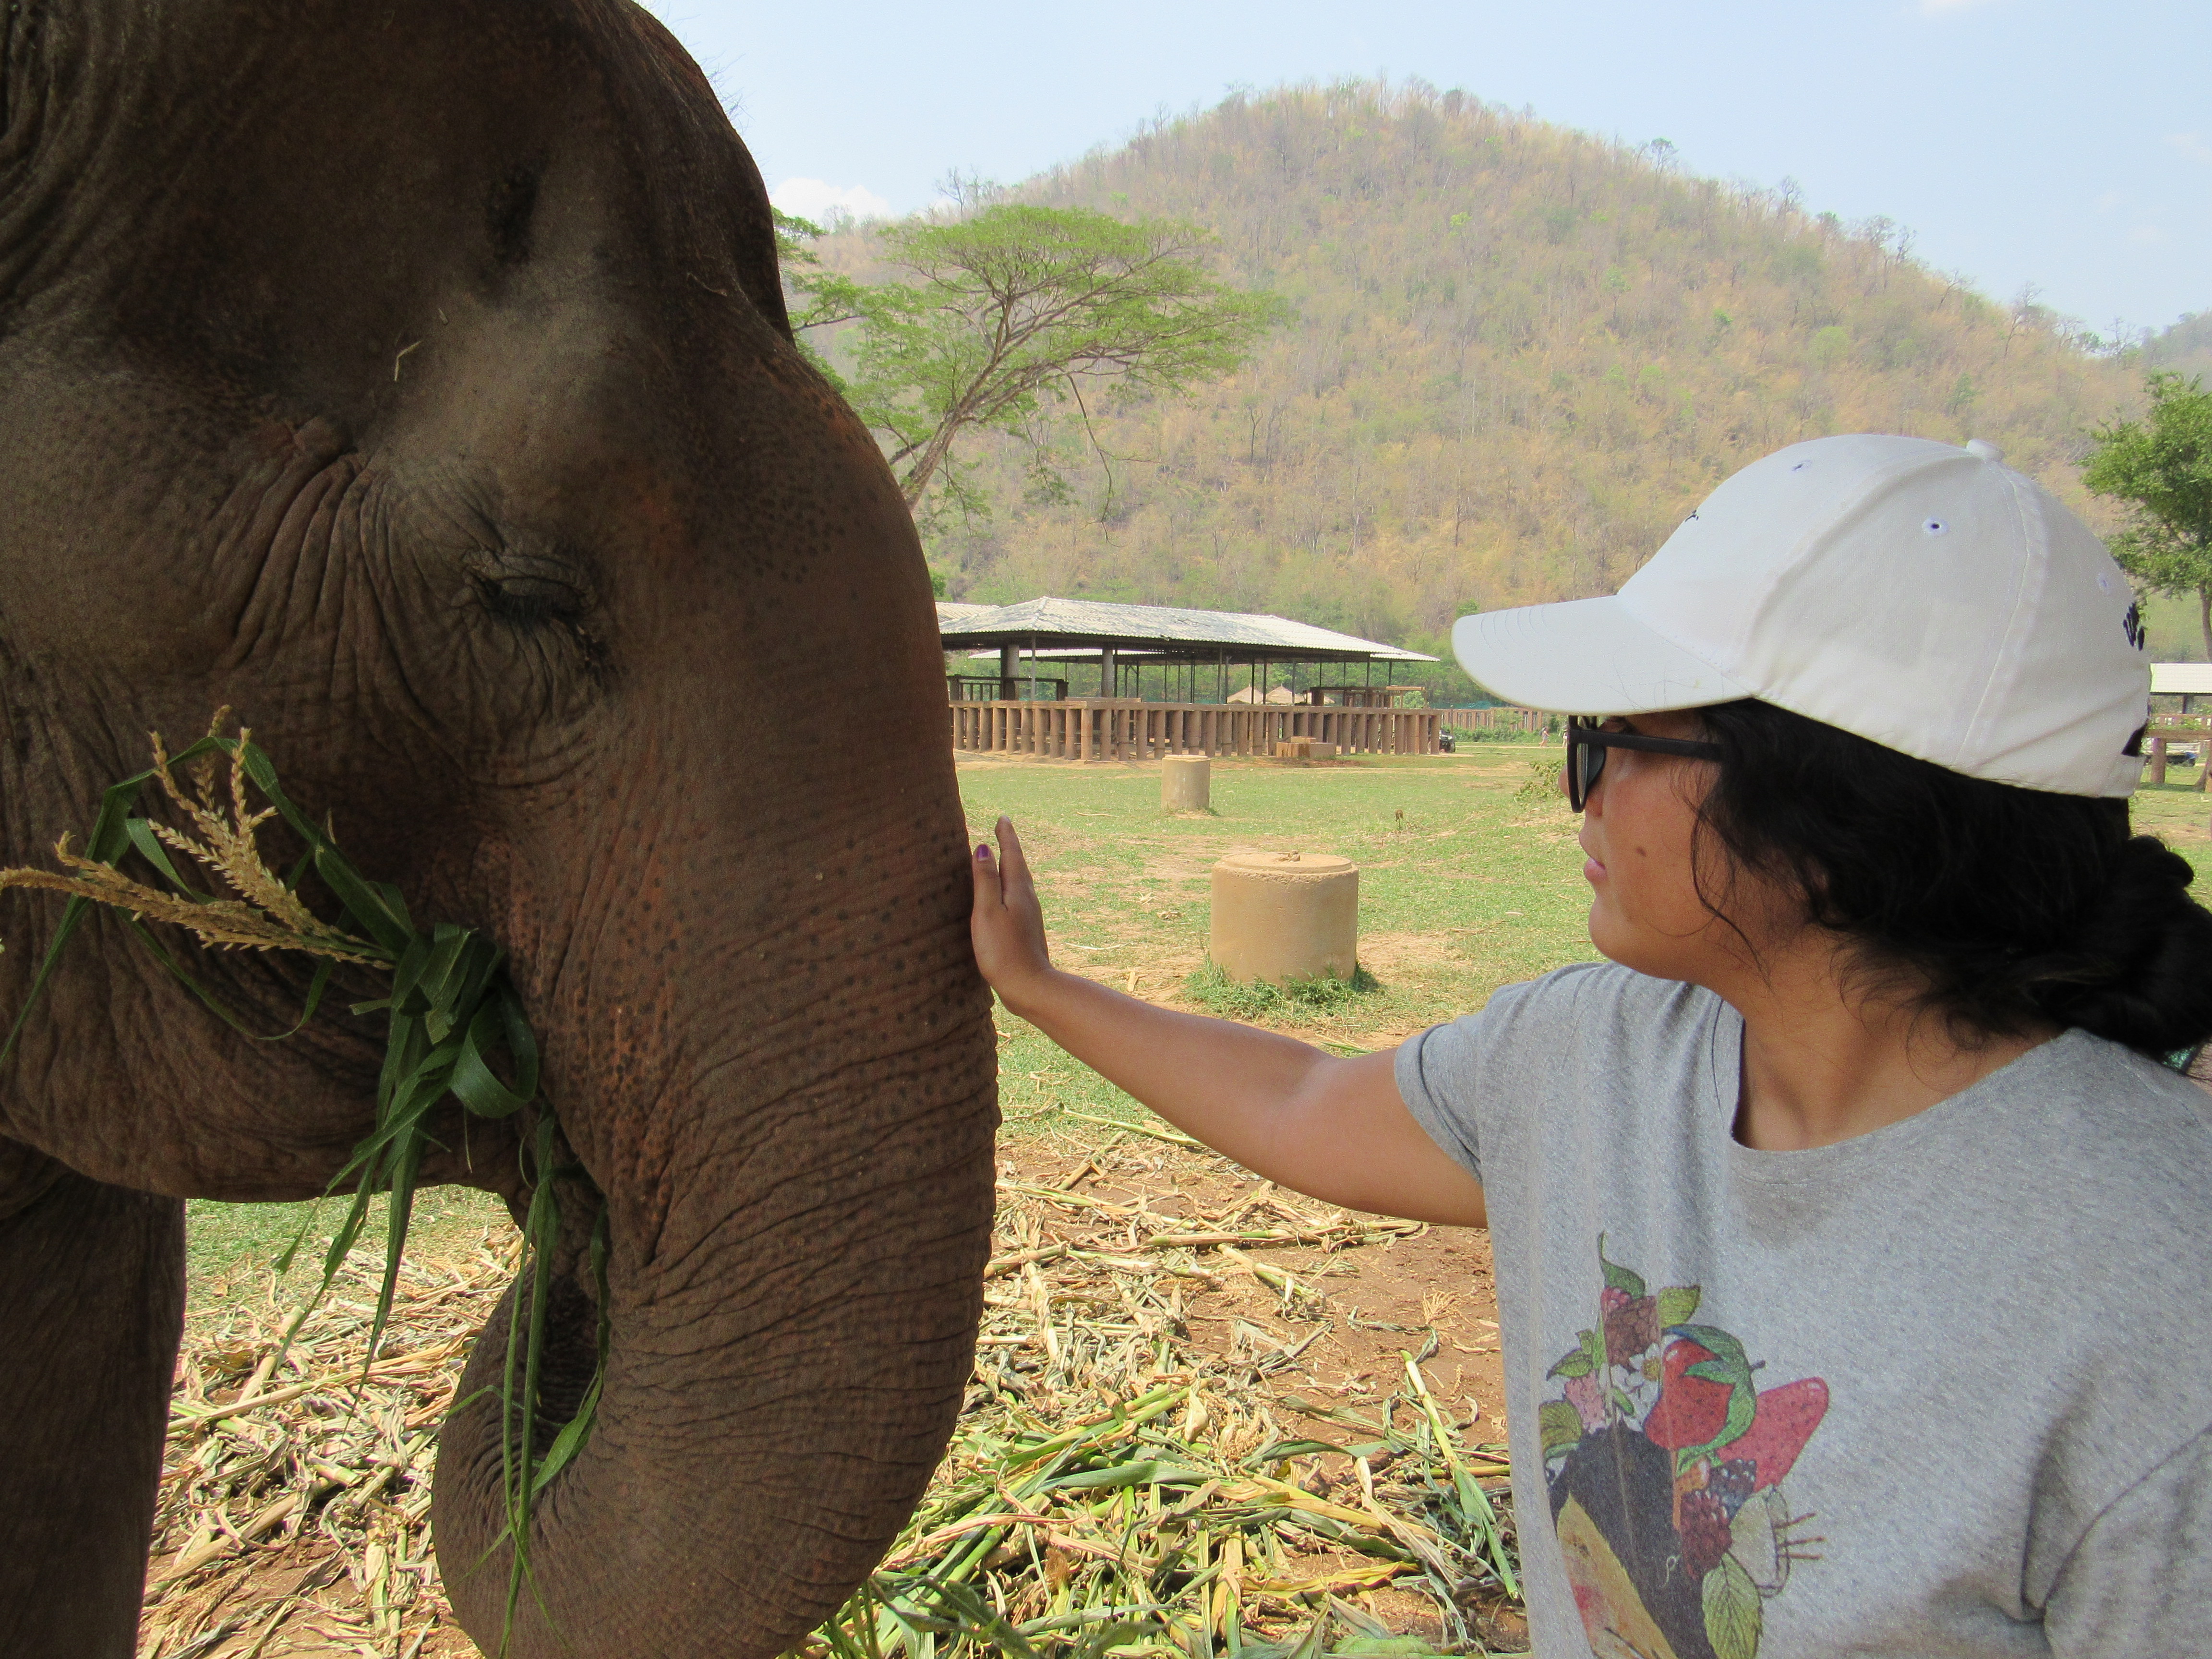 Feeding rescued elephants from explotation and abuse by tourist treeking and shows